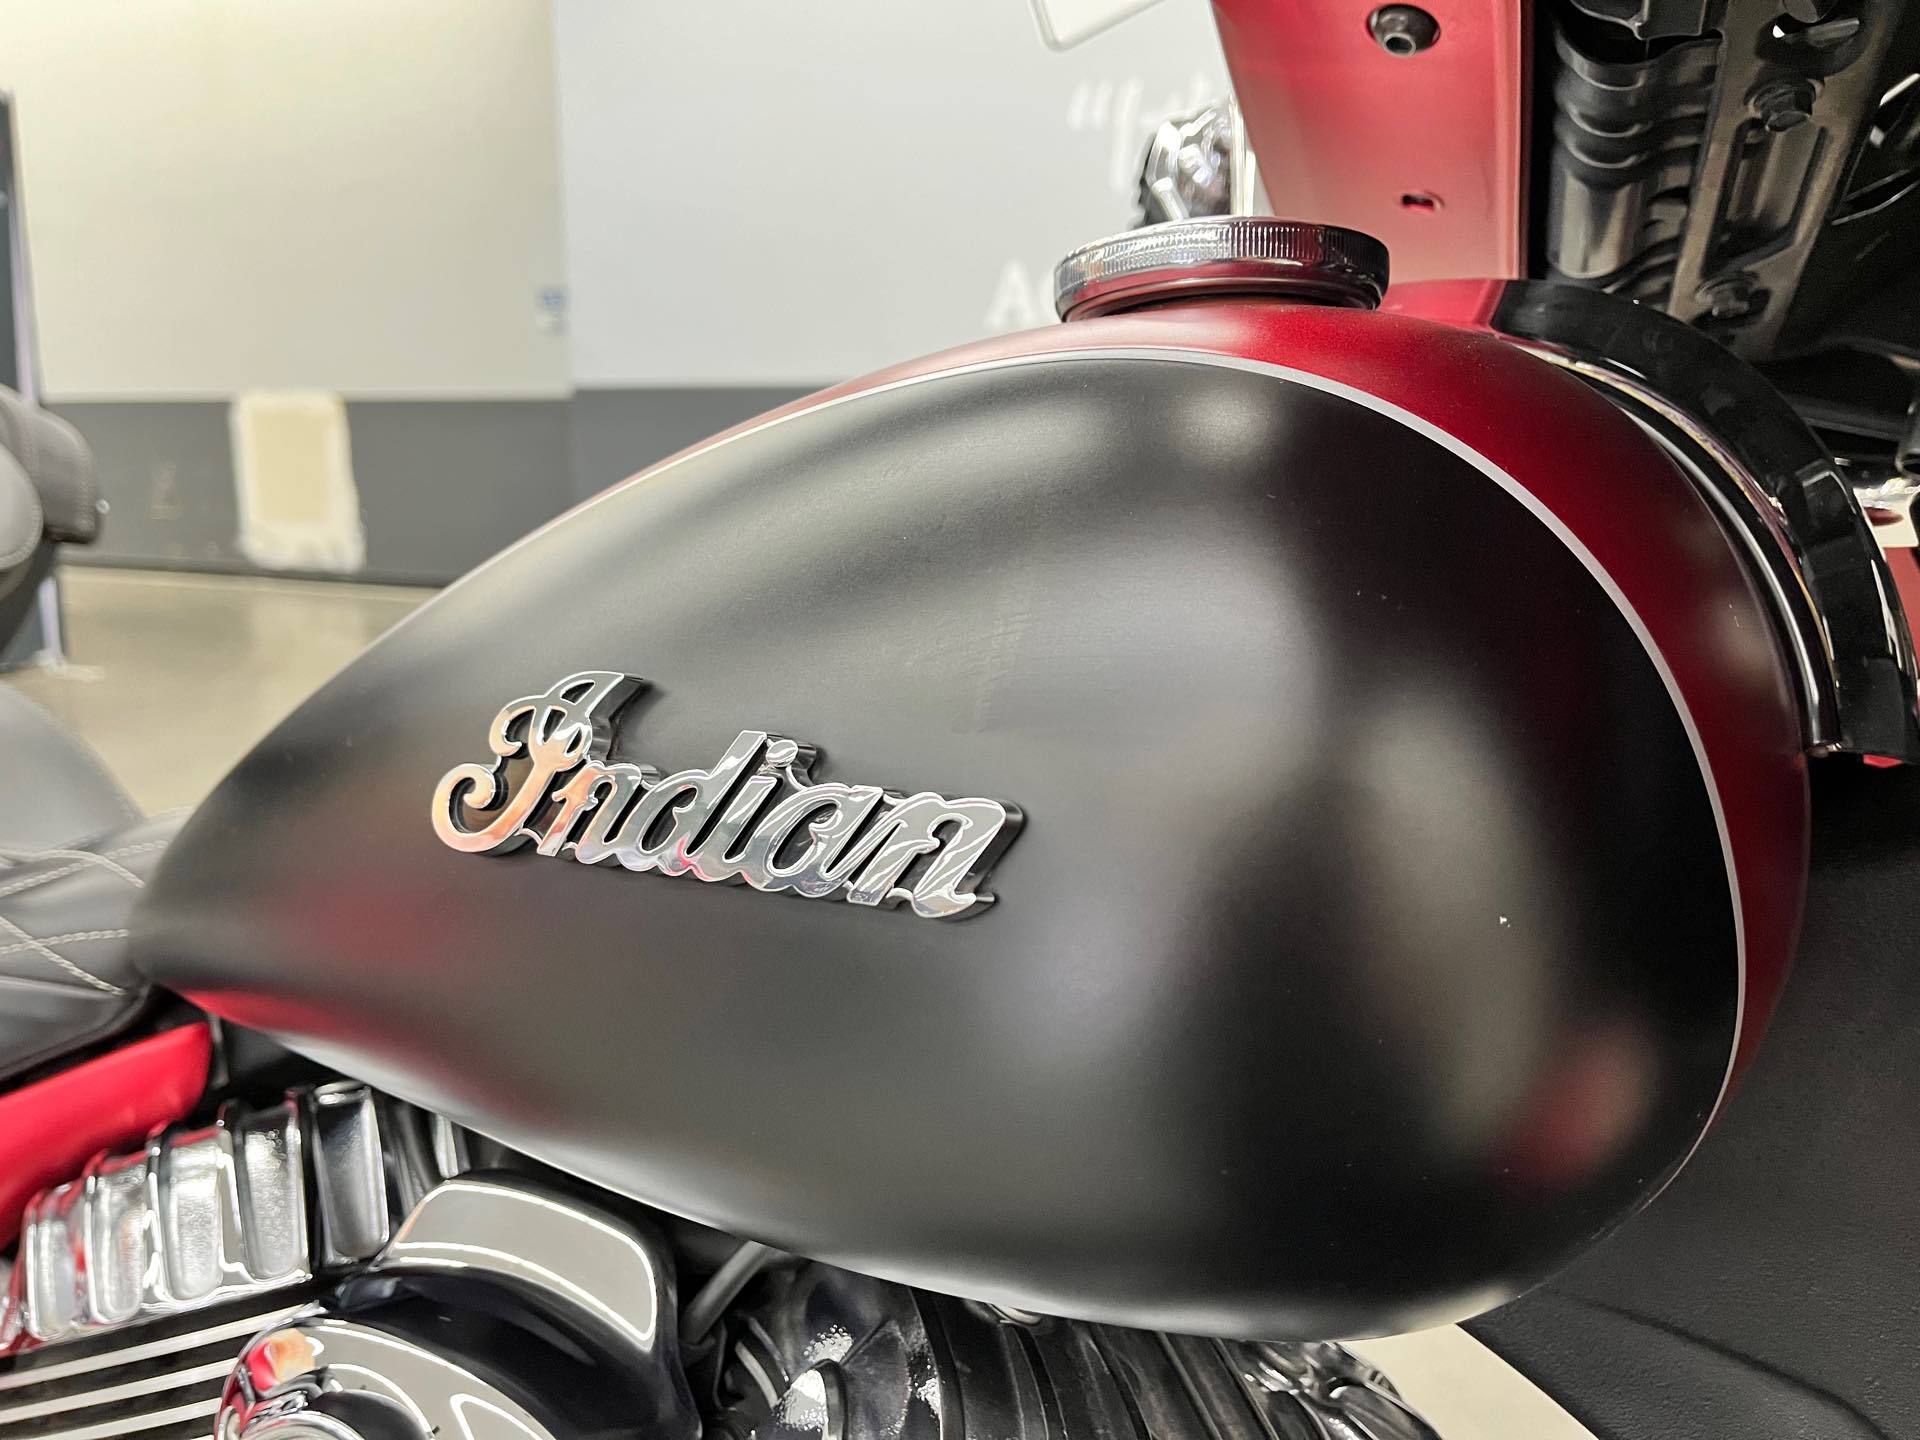 2019 Indian Motorcycle Roadmaster Base at Aces Motorcycles - Denver